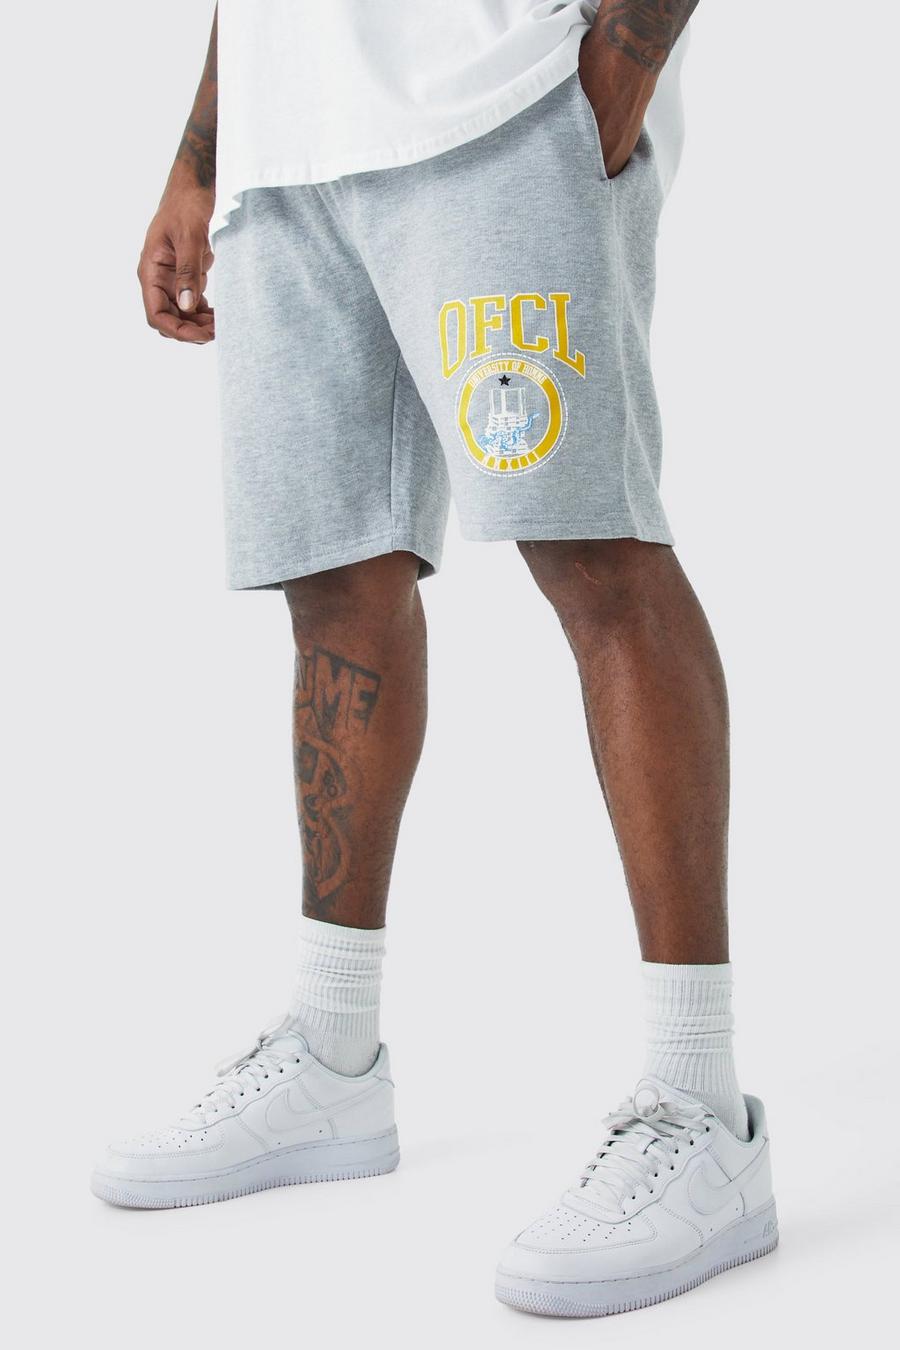 Plus lockere Official Shorts in Grau, Grey image number 1